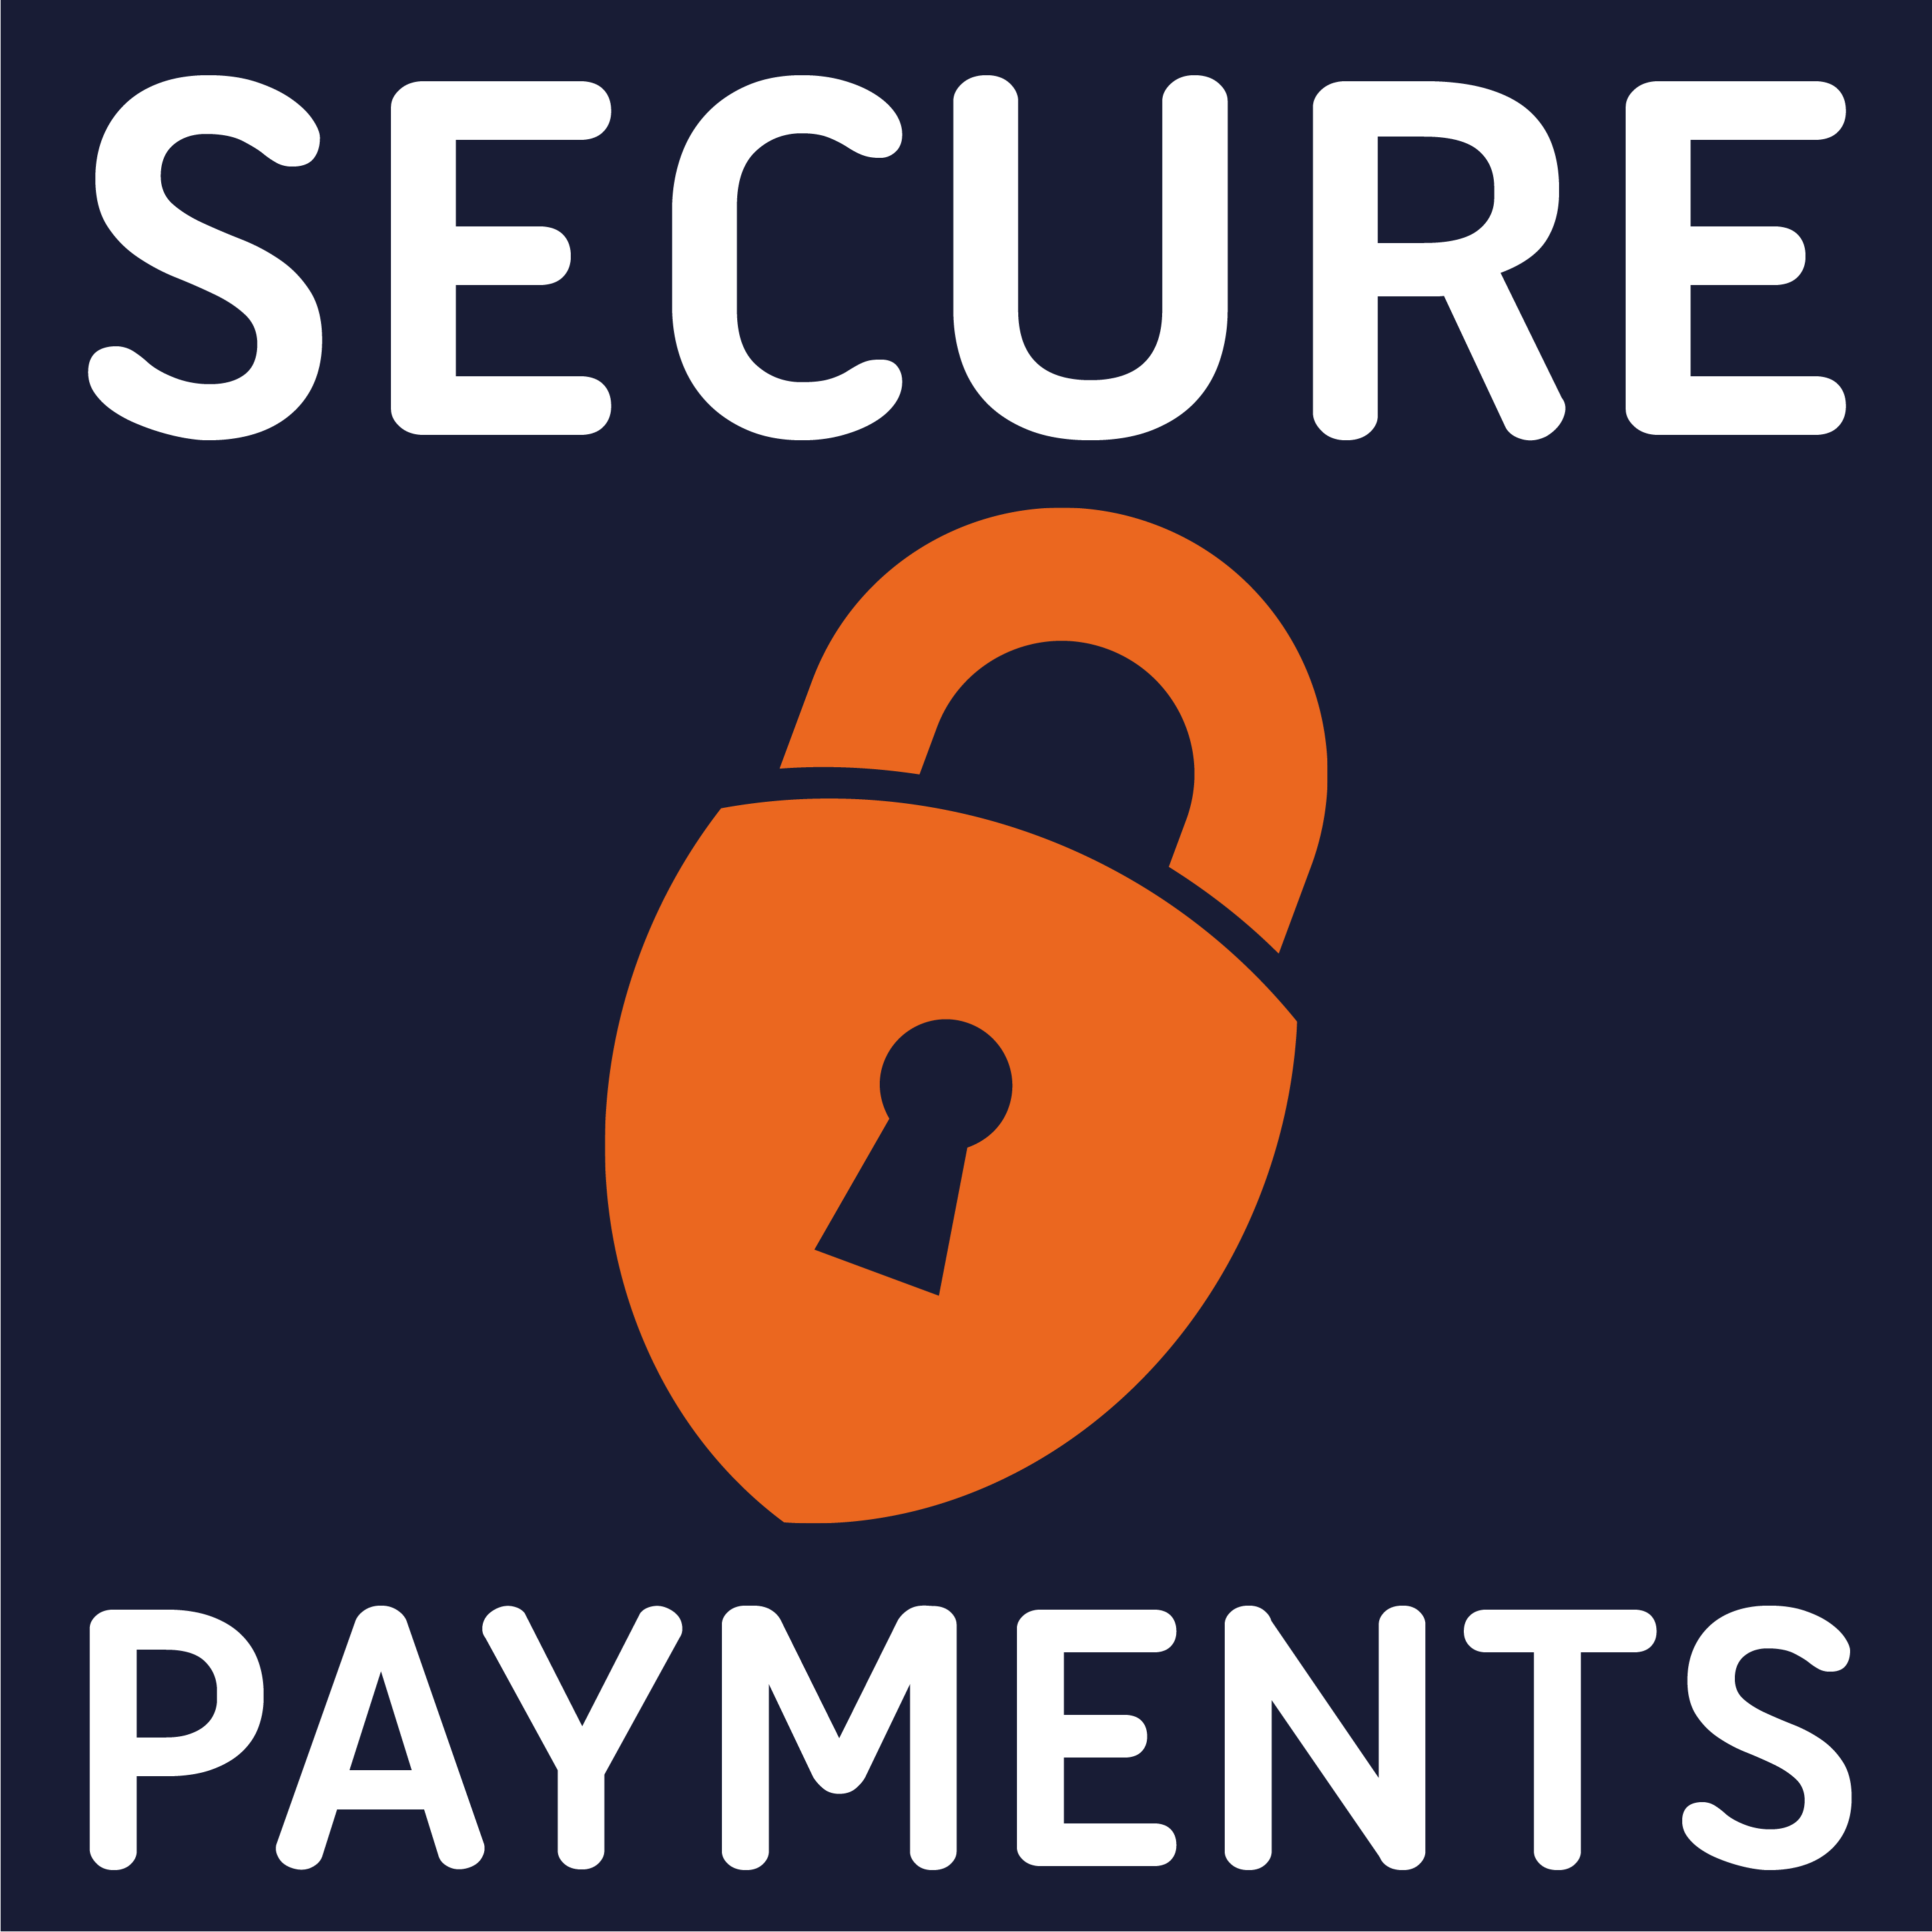 Securing payments in 2021 Australia